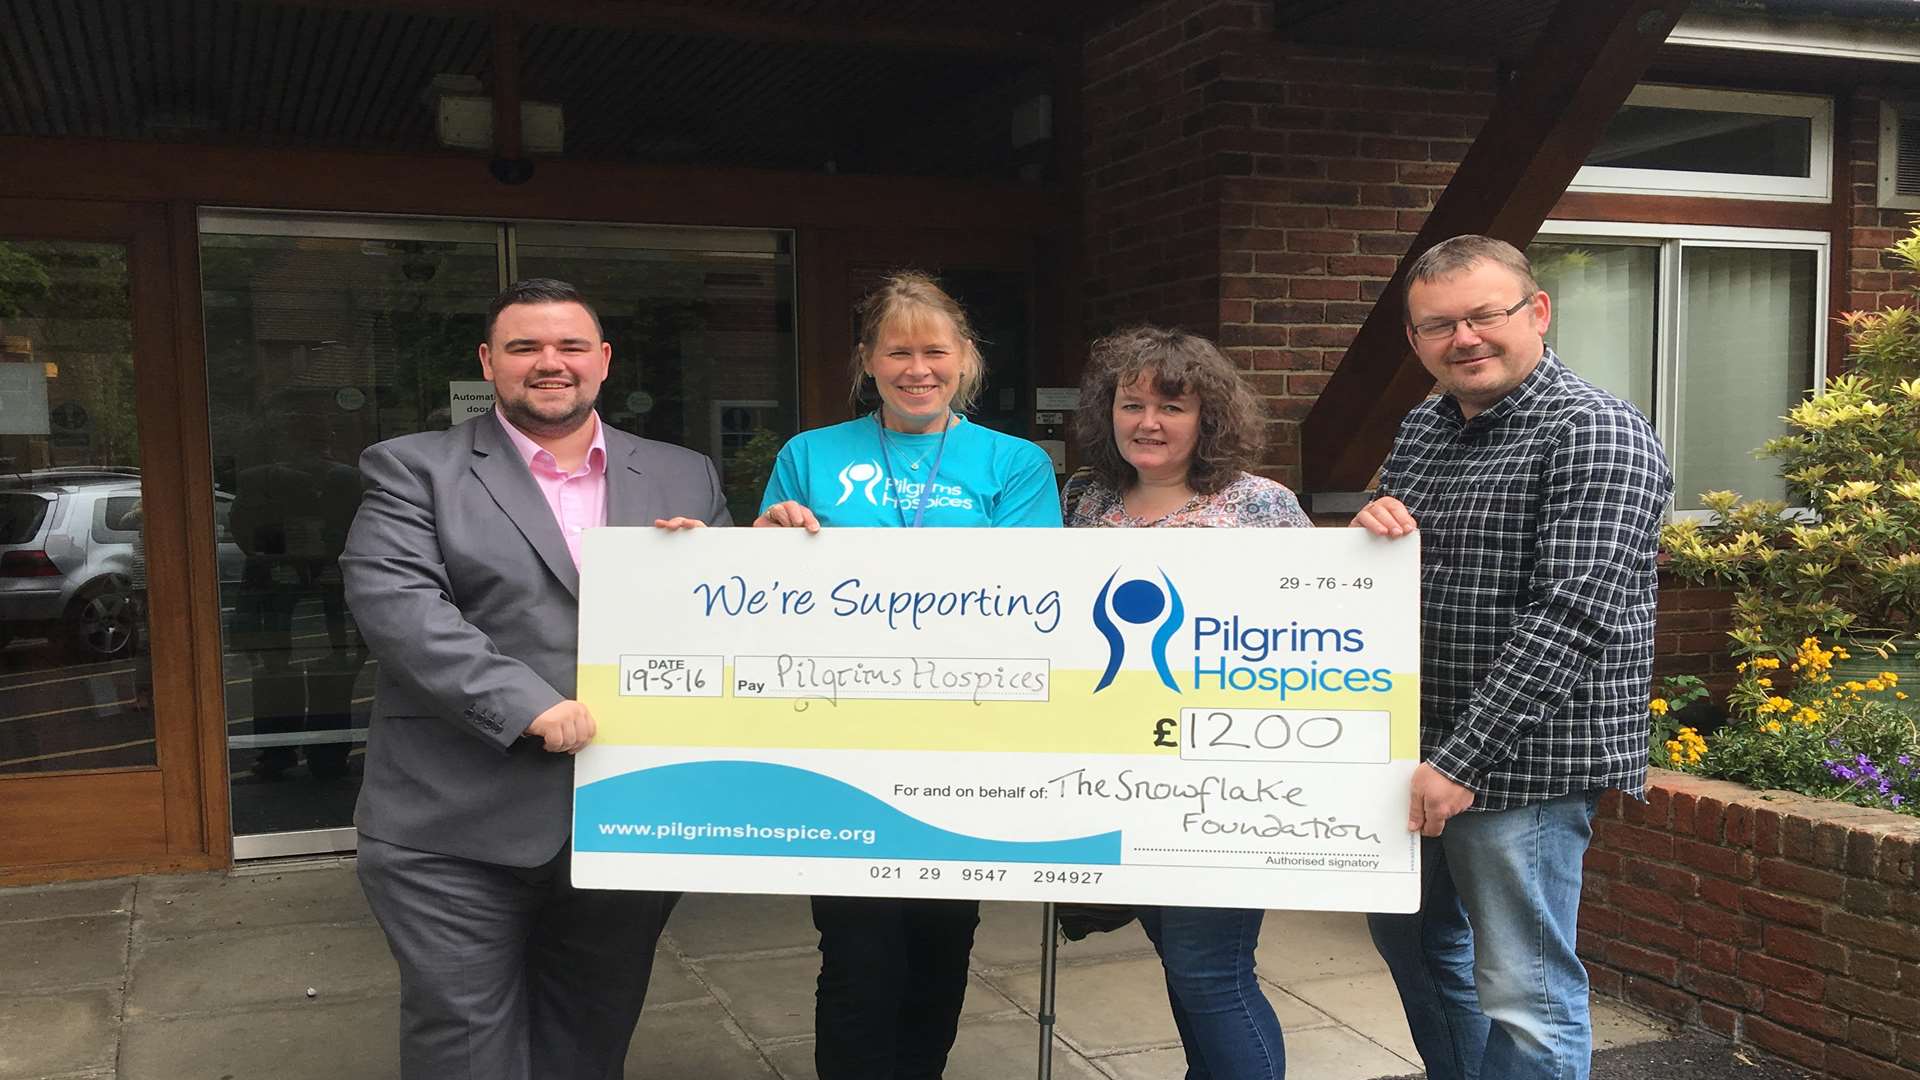 The cheque presentation from the Snowflake Foundation to Pilgrims Hospices.From left, Snowflake chairman Andrew Martyn, Deborah Kellond (corr), of Pilgrim's Hospices, Snowflake members Liz Grant and Gordon Bishop